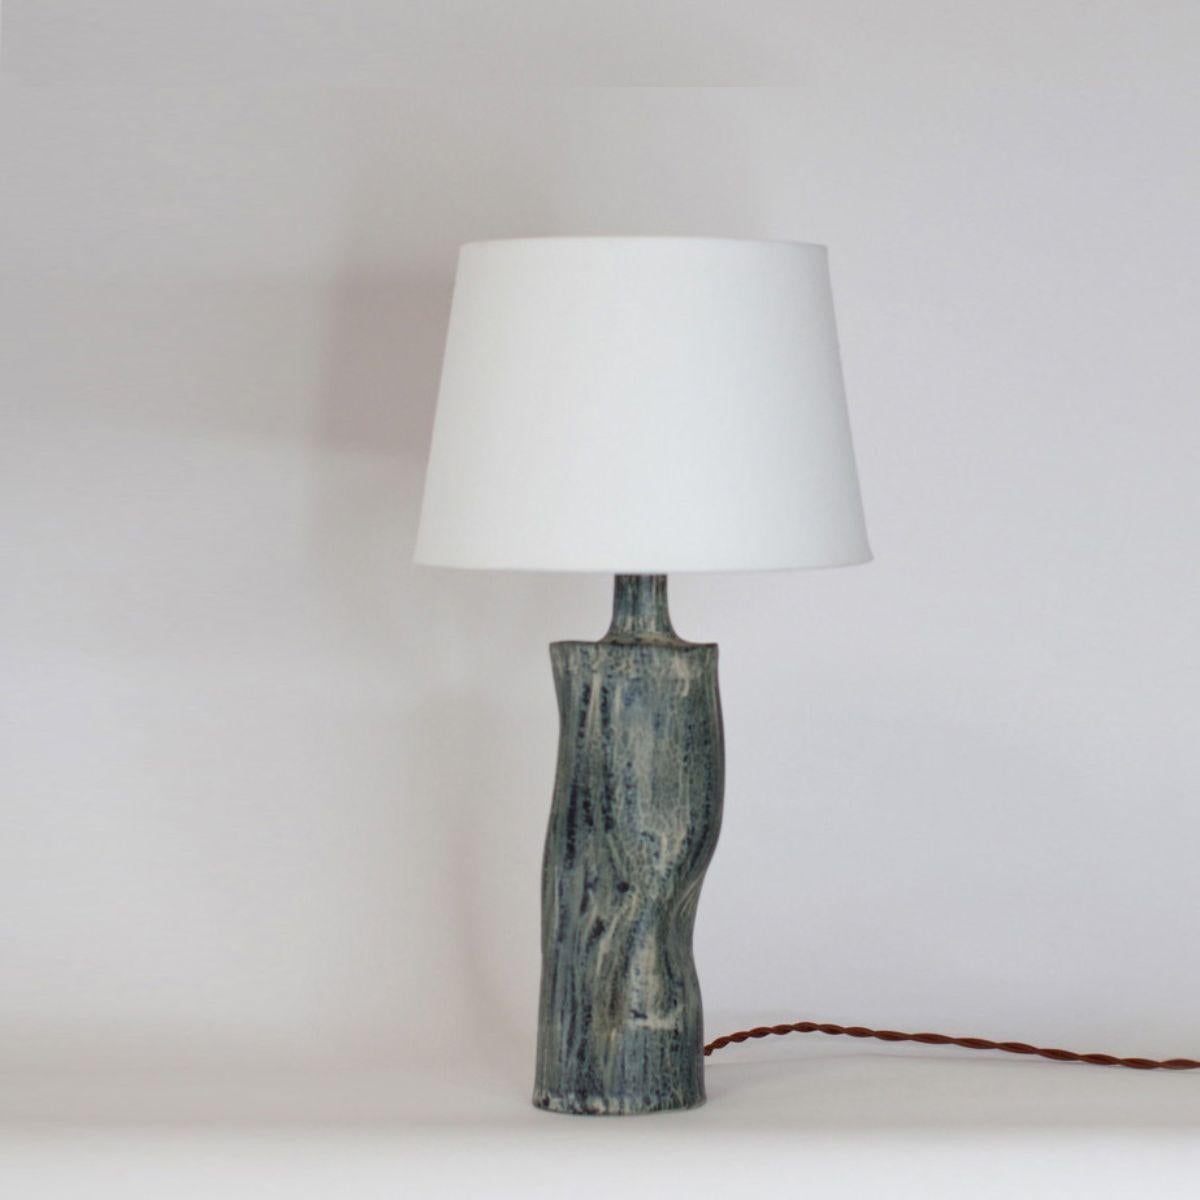 'Difforme' tiger glaze ceramic table lamp with parchment shade by Design Frères.

Wired with high-end twist cord and 3-way switch (on, half intensity, off). A 40w filament bulb is included in your order. The European style parchment shade (no harp